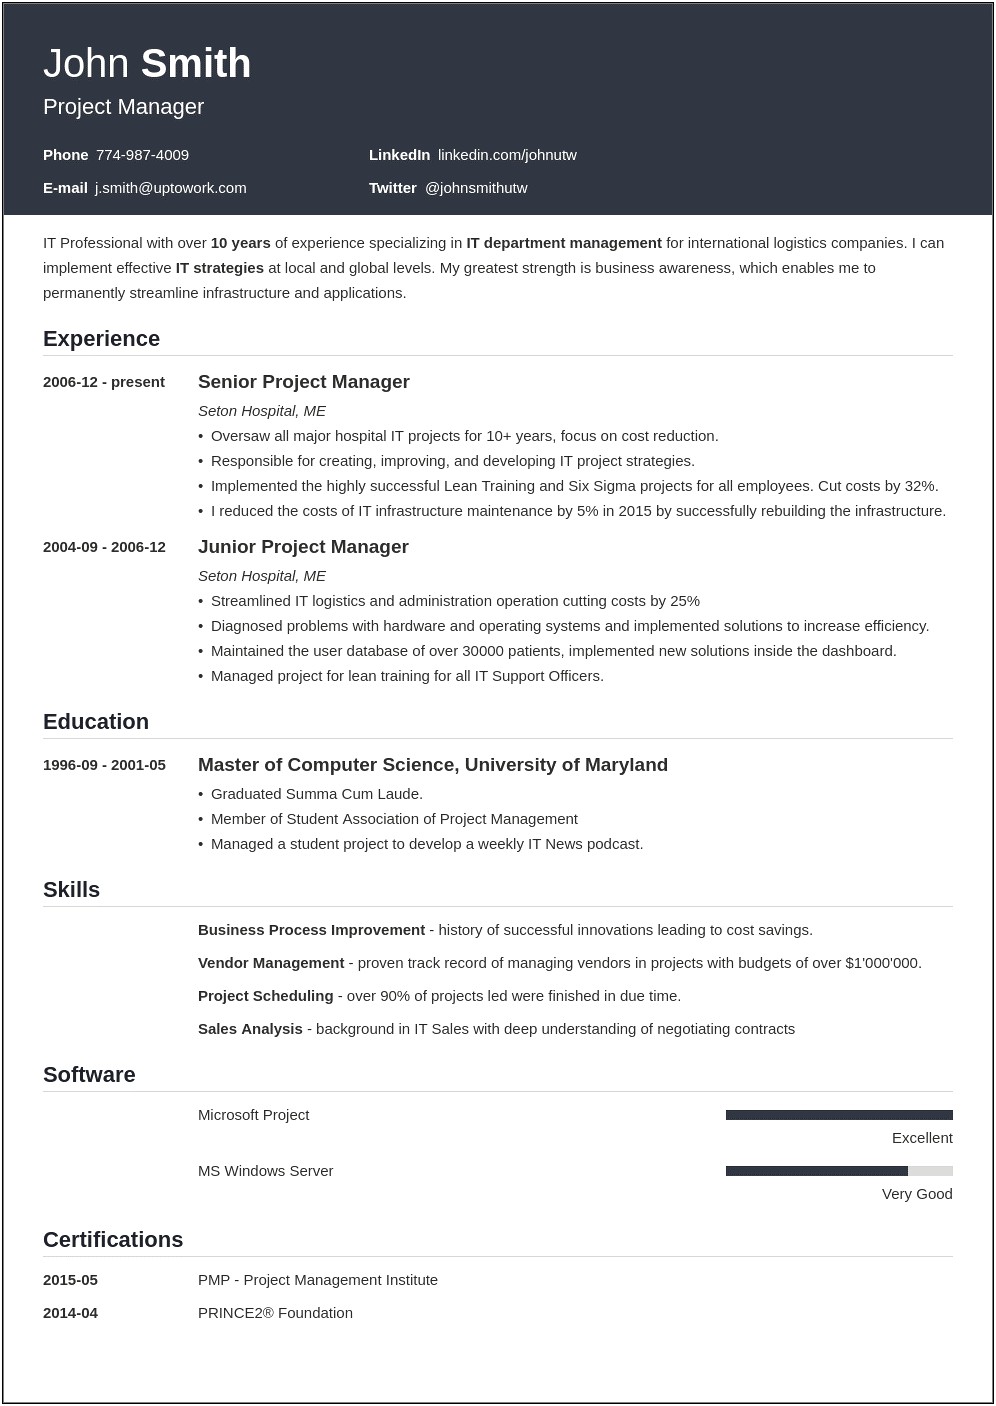 Resume Format In Word For Autofill Applications